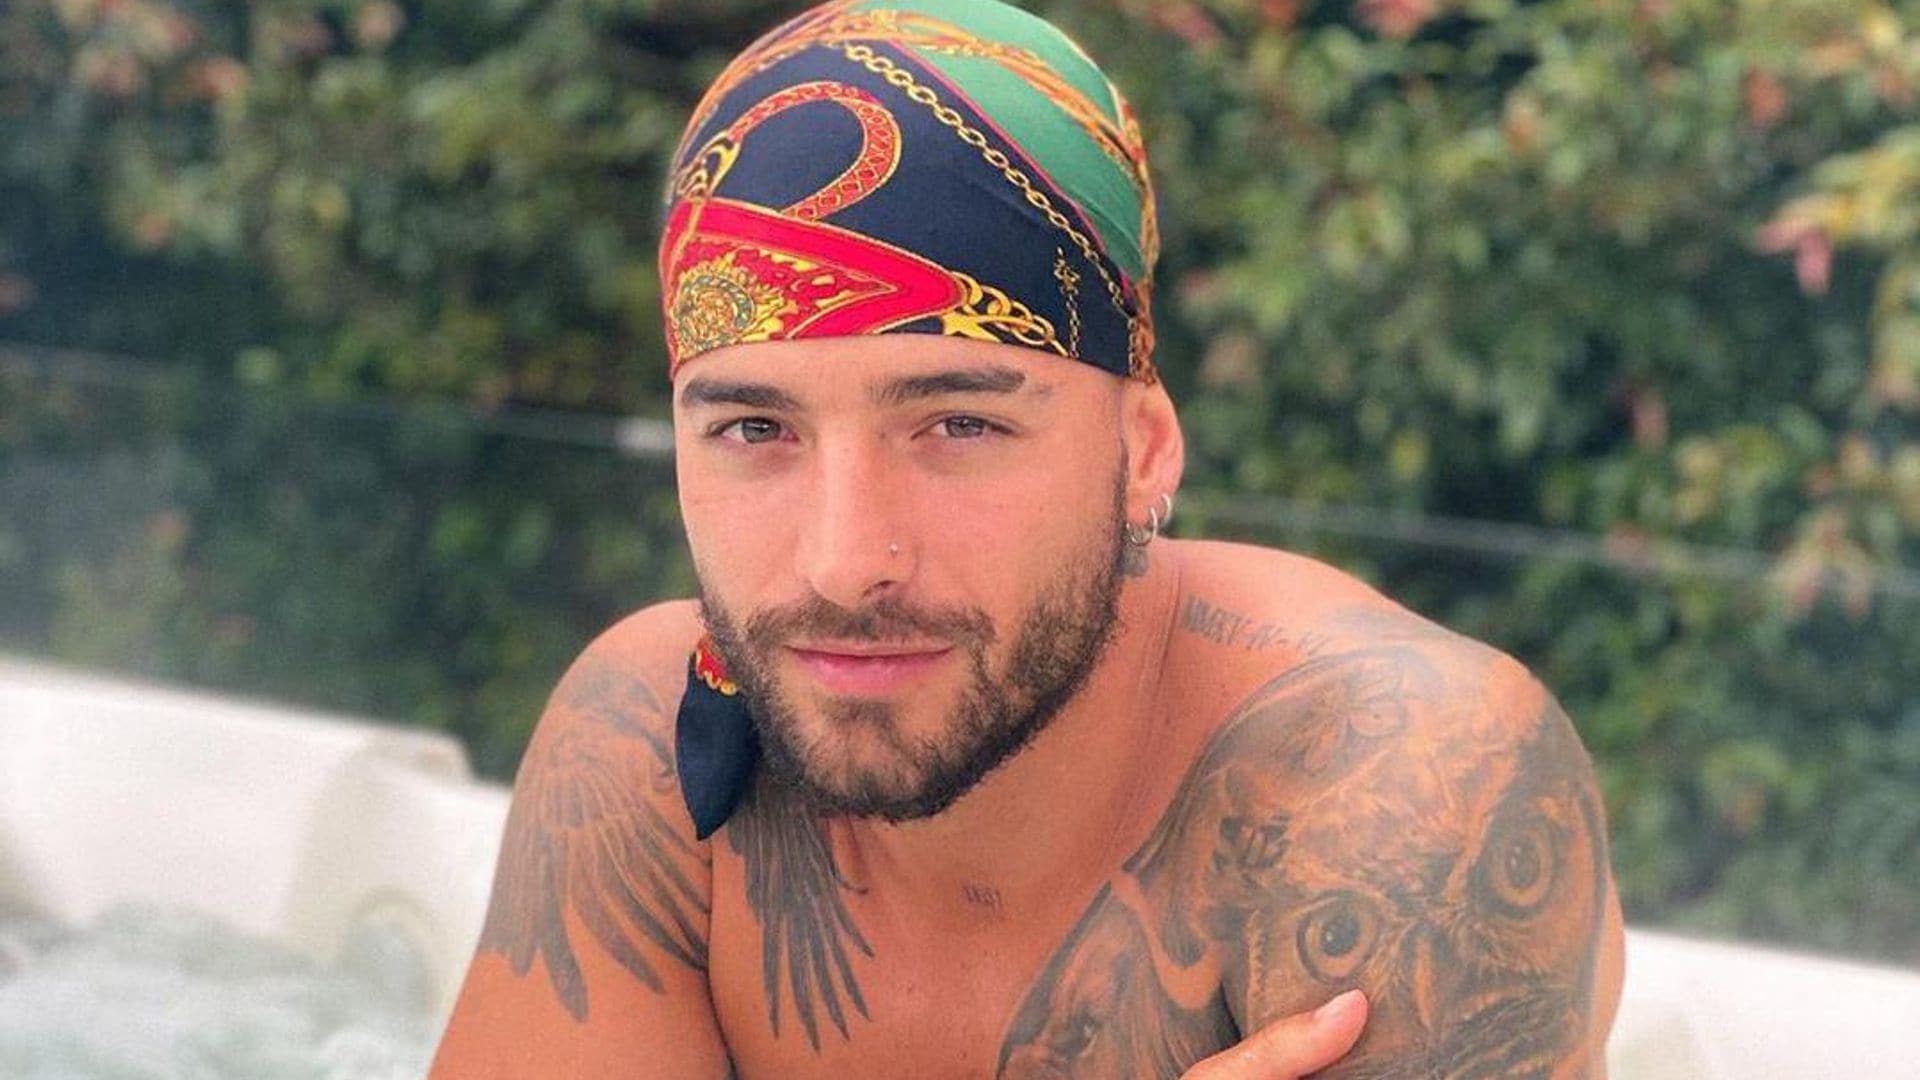 Maluma shares a special moment with his equally as handsome grandfather